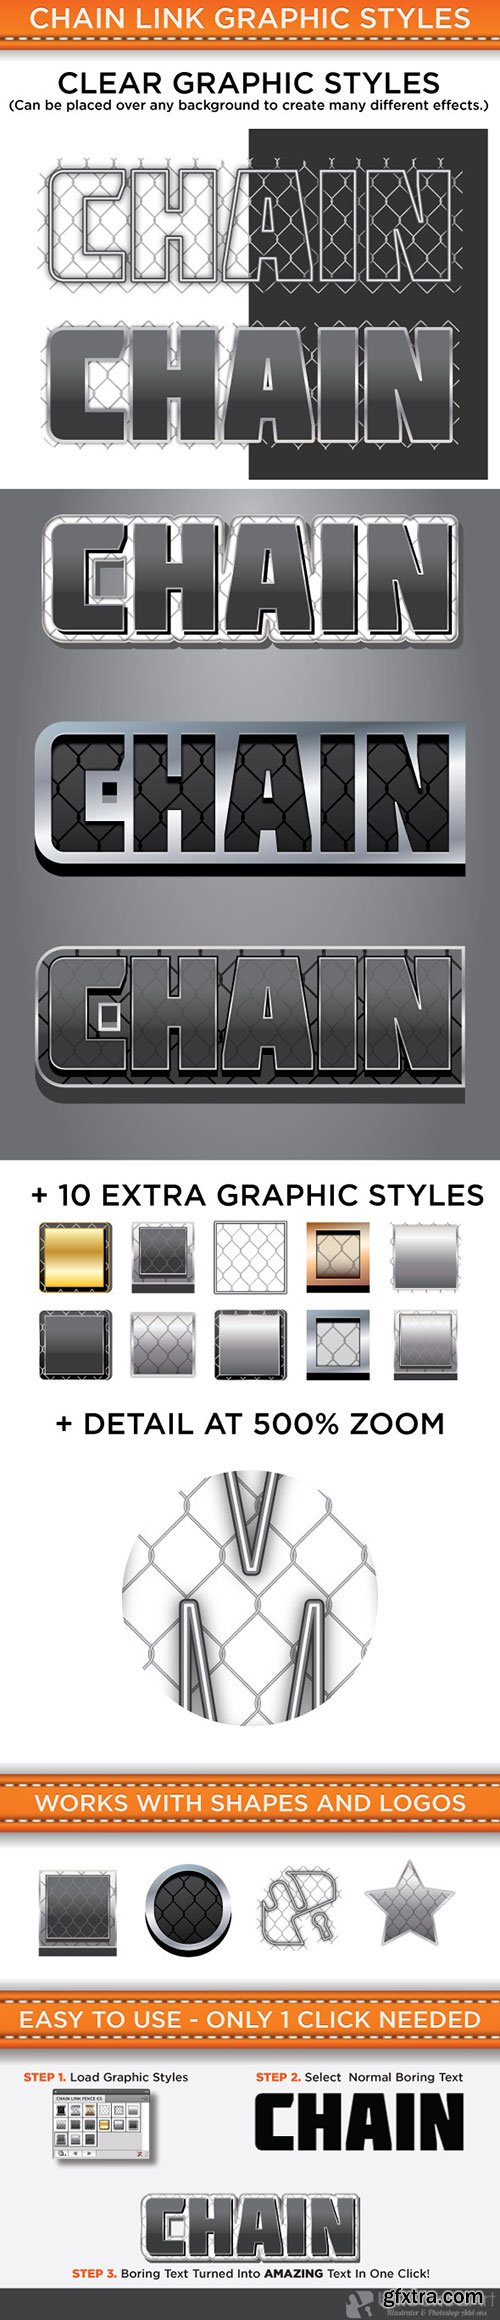 GraphicRiver - Chain Link Graphic Styles